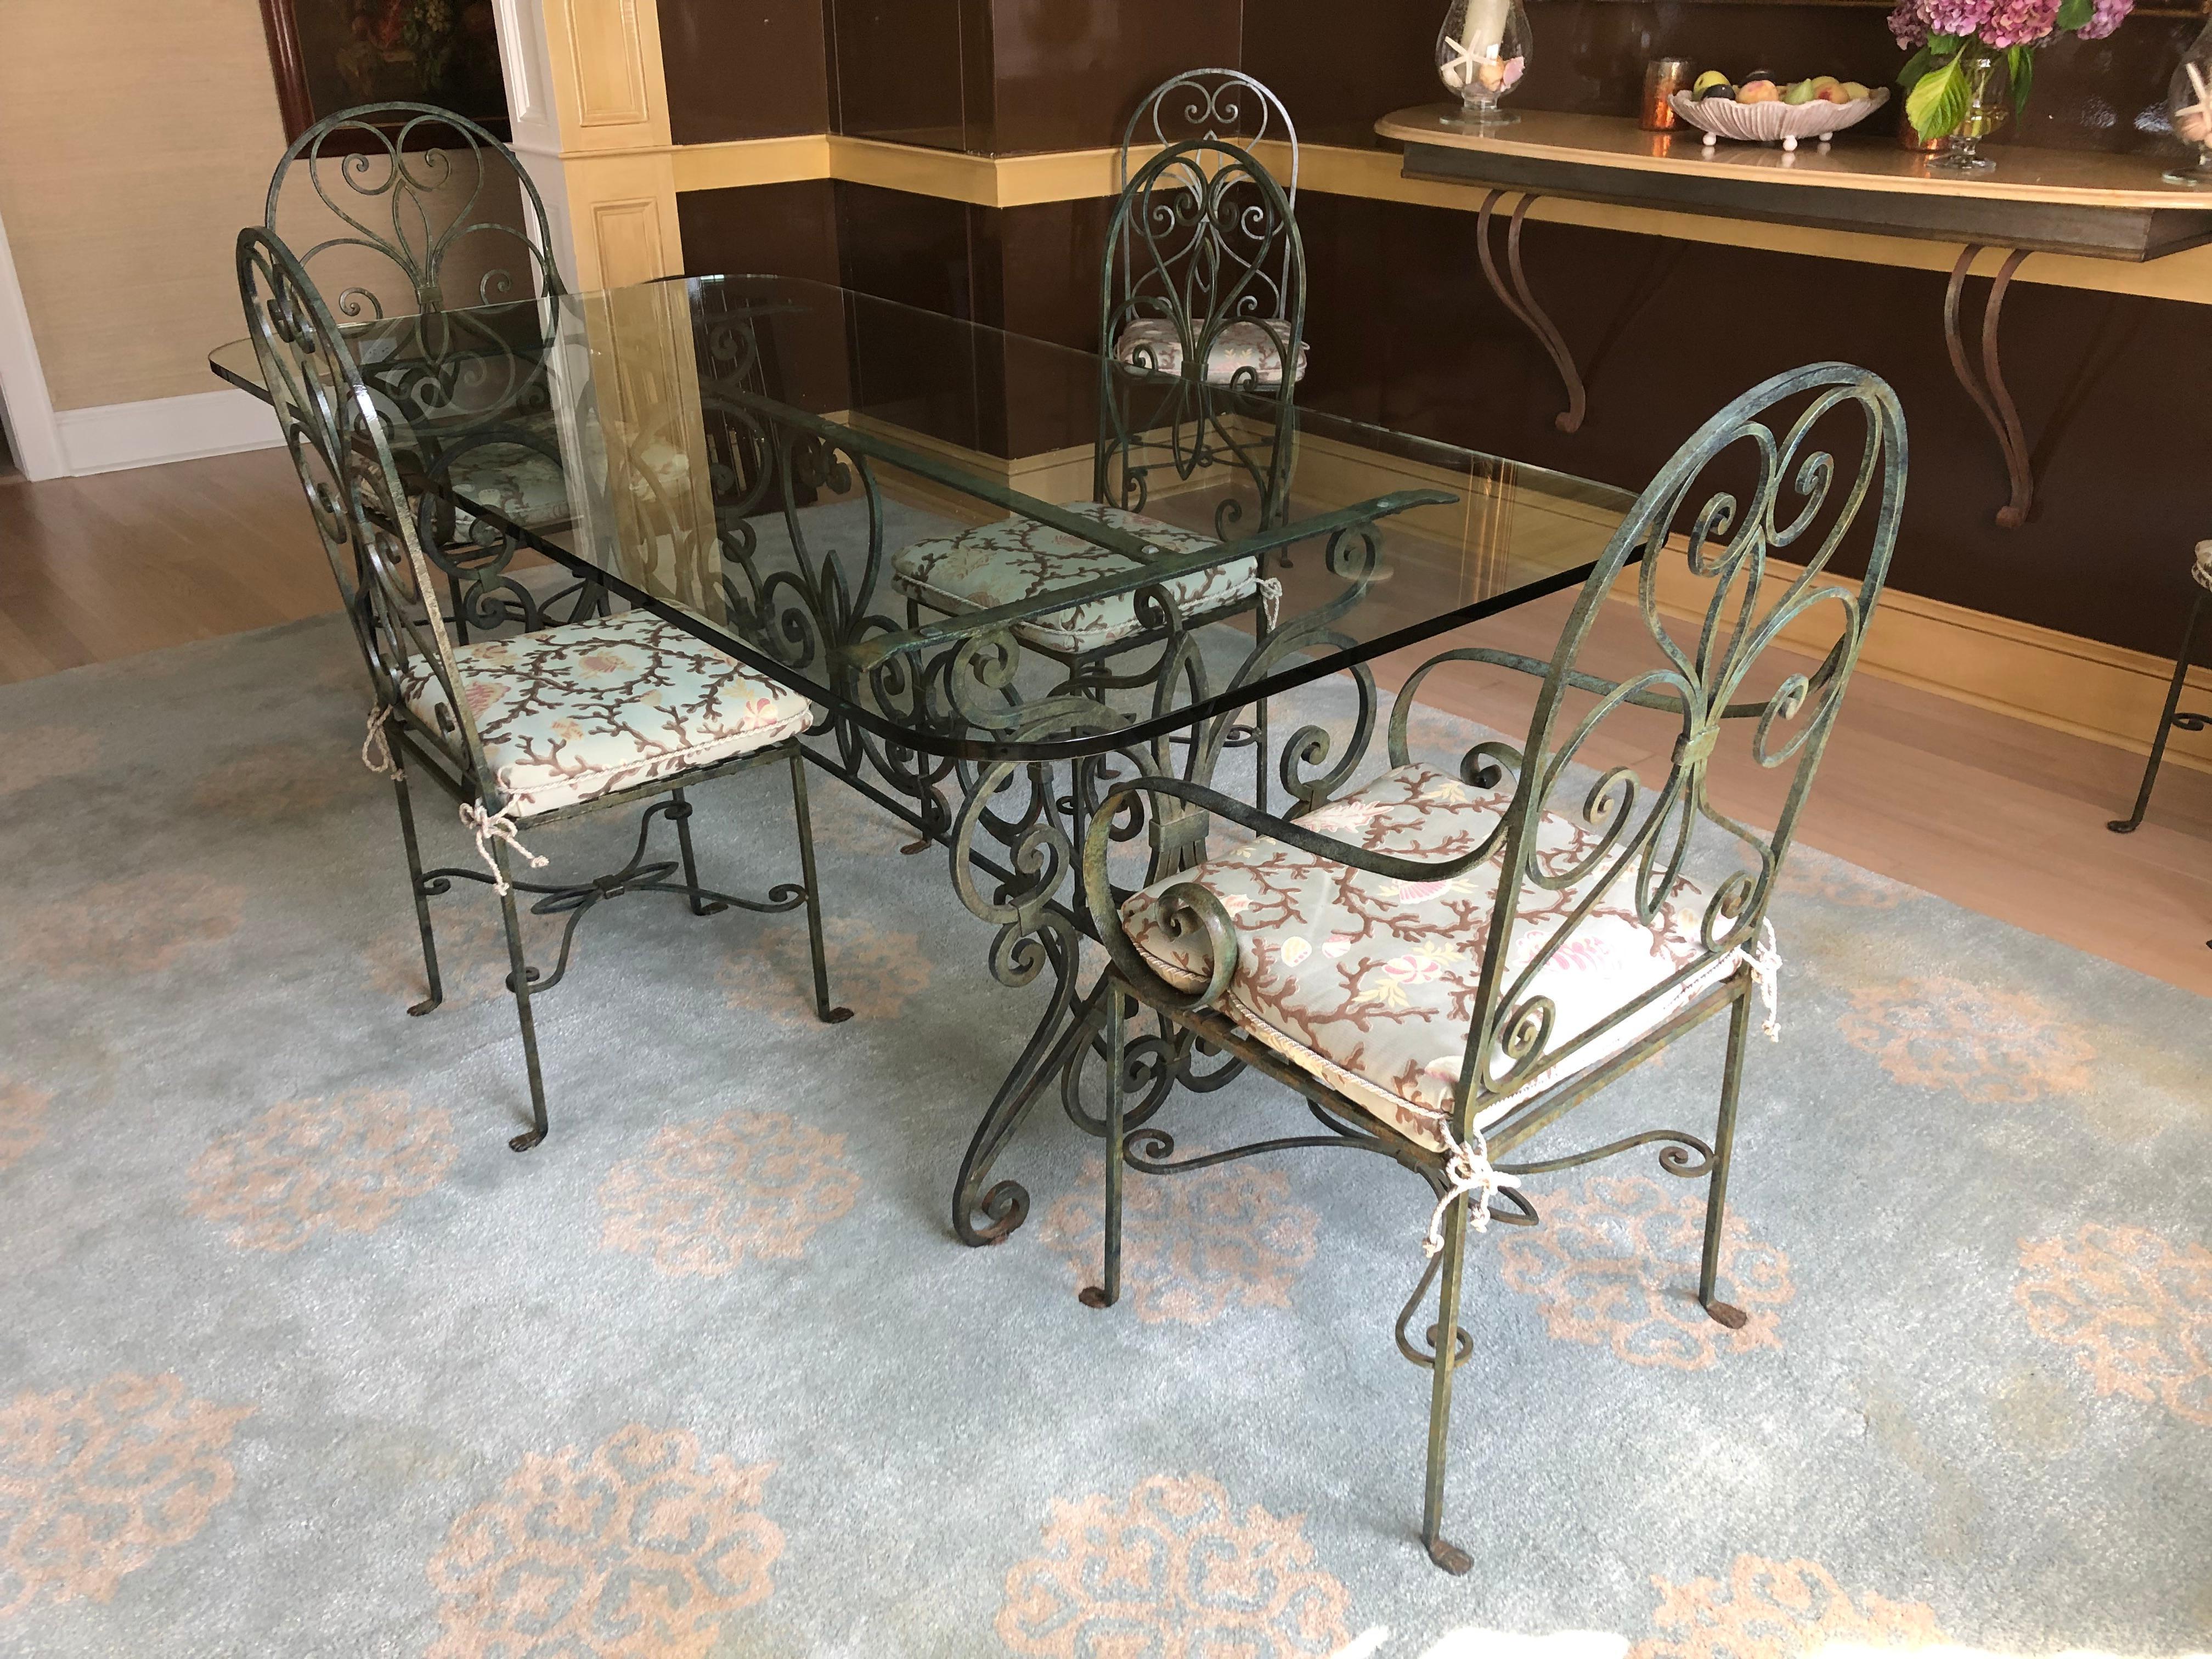 Super dramatic one of a kind dining table and 8 chairs having curlicue verdigris wrought iron and more than 6.5 feet long glass top .75 thick.
Base itself without glass 57 L 32 D 30 H
Armchairs 19.75 w 19 d 42 h arm height 26.75 seat height with